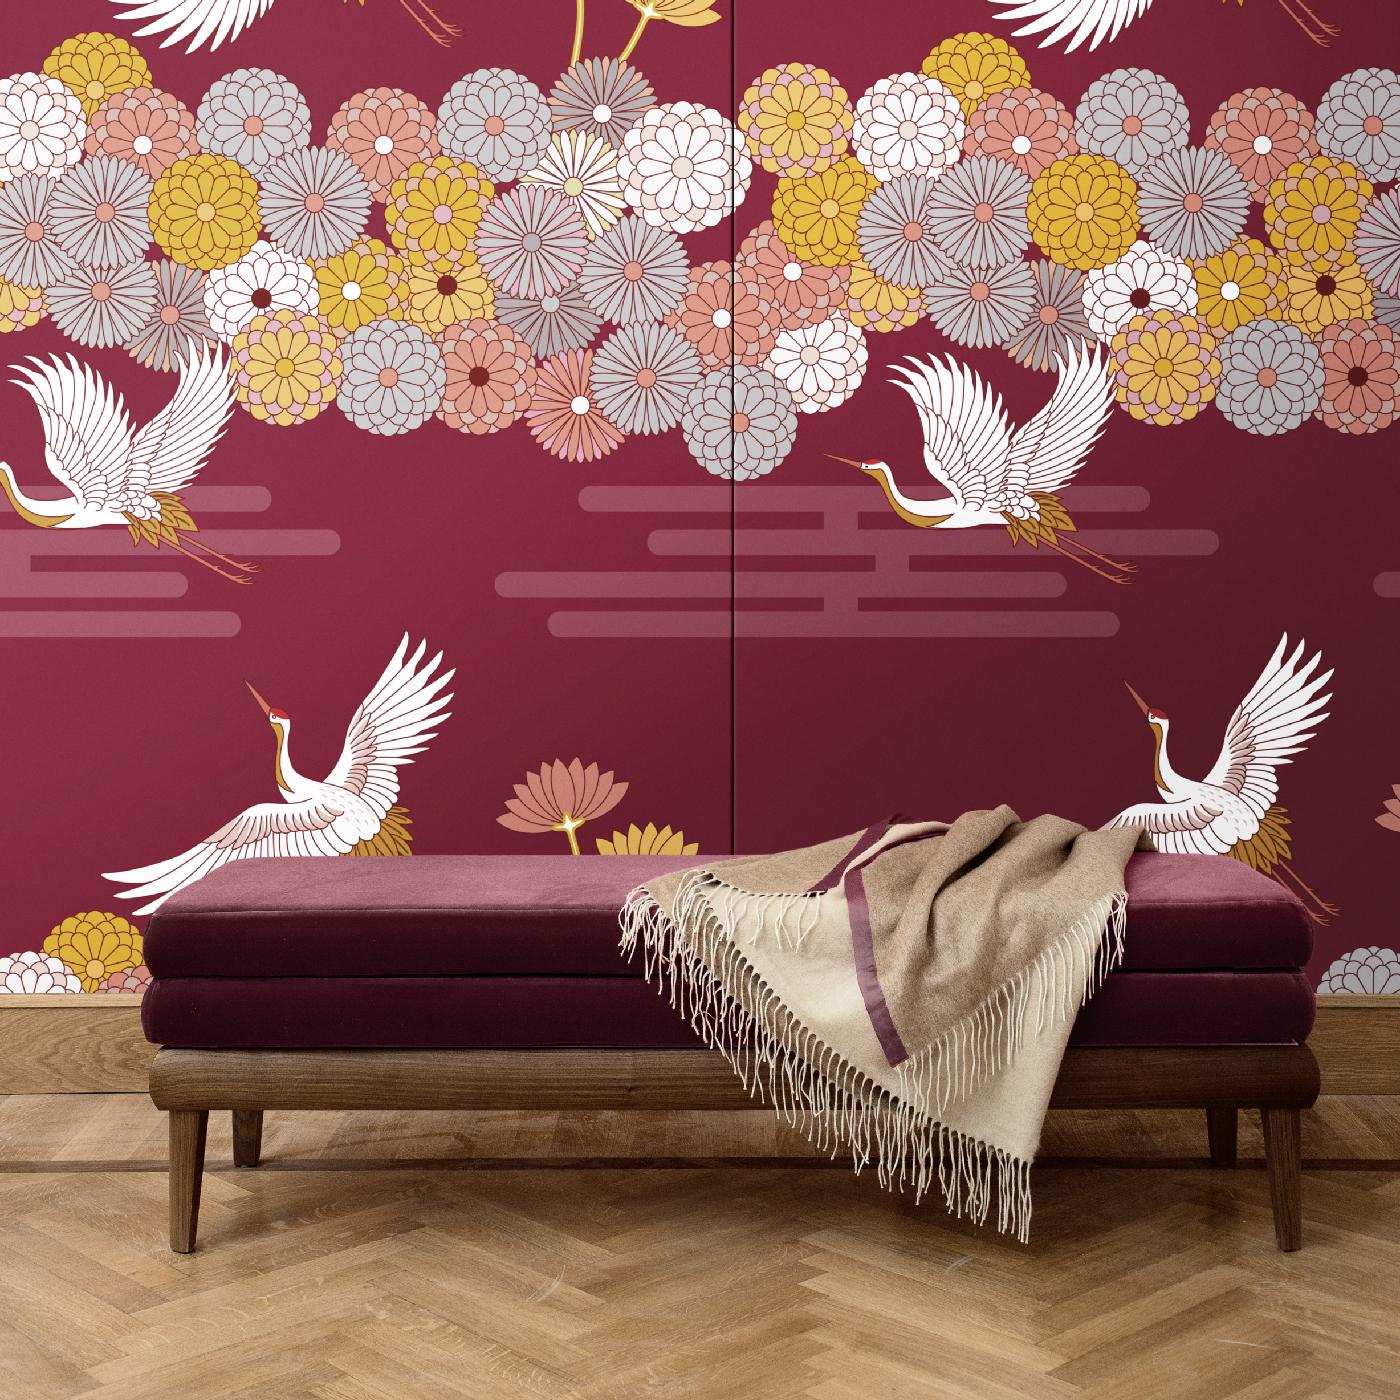 Crafted of silk and cotton, this wall covering is part of the Flowers and Storks collection. This Japanese-inspired scene will imbue with dramatic dynamism and sophistication any interior. It depicts golden storks and stylized flowers over a crimson